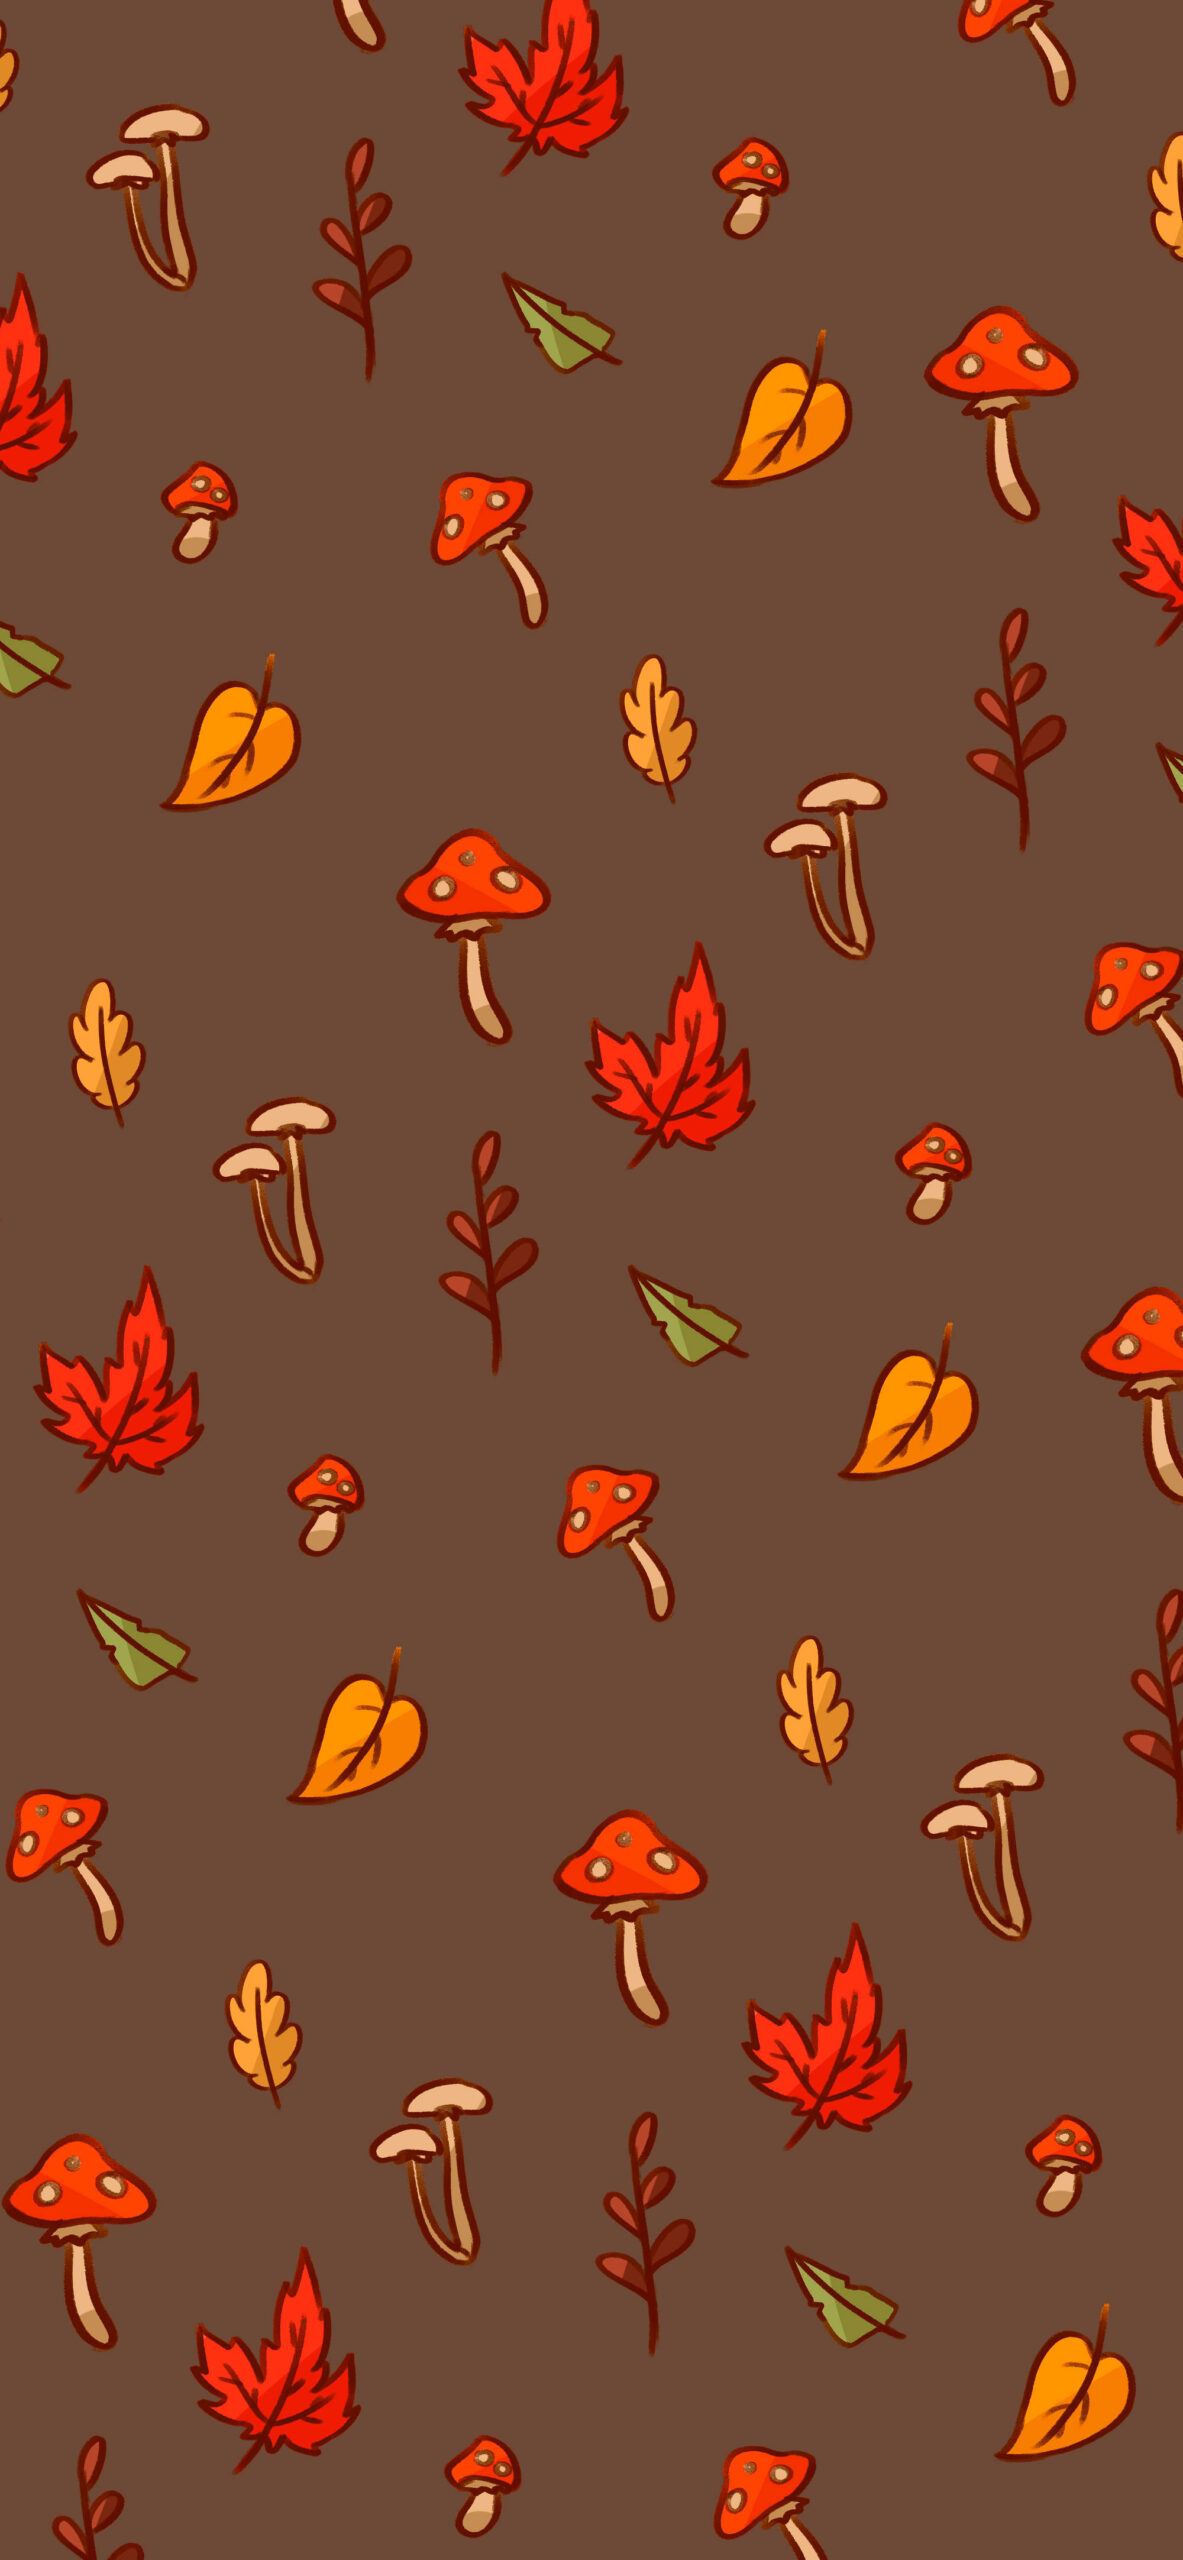 Tan Fall Aesthetic Wallpapers for iPhone - Autumn Wallpaper For Phone